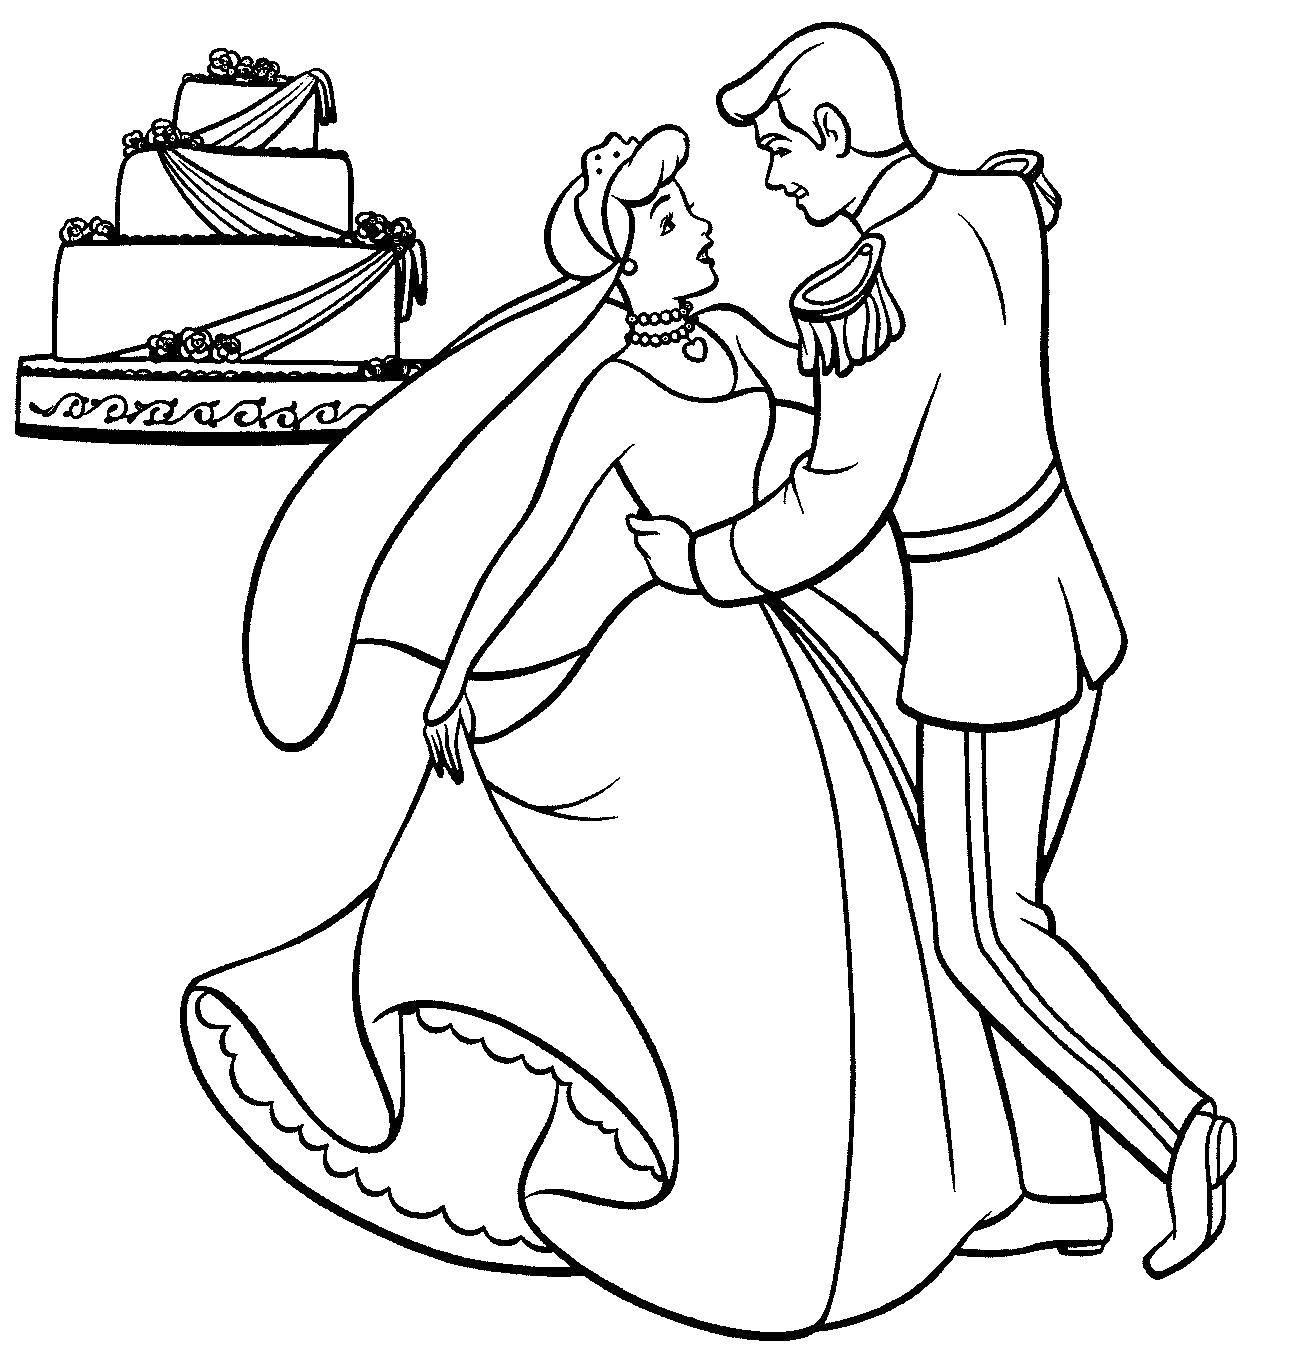 Coloring The bride and the Prince. Category Wedding. Tags:  the groom, bride, cake.